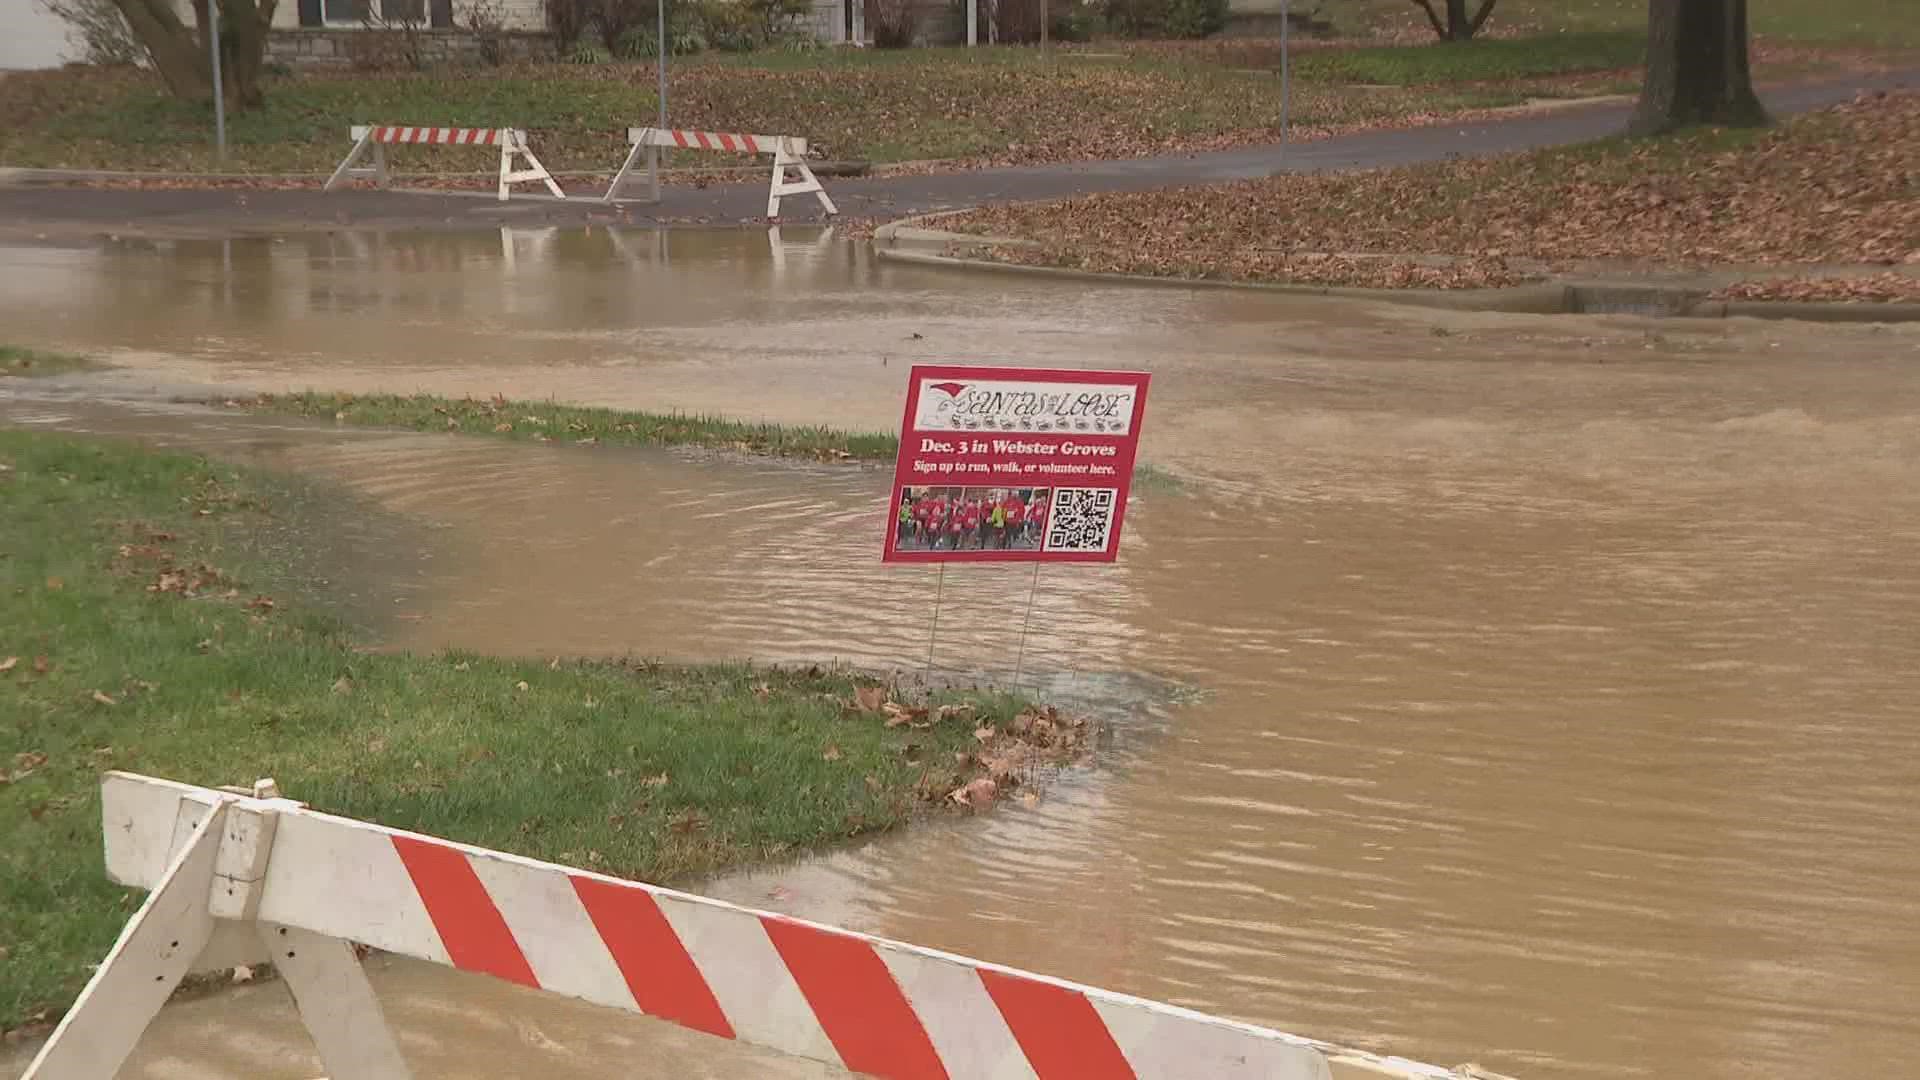 Crews worked on two water main breaks in the area Tuesday morning.